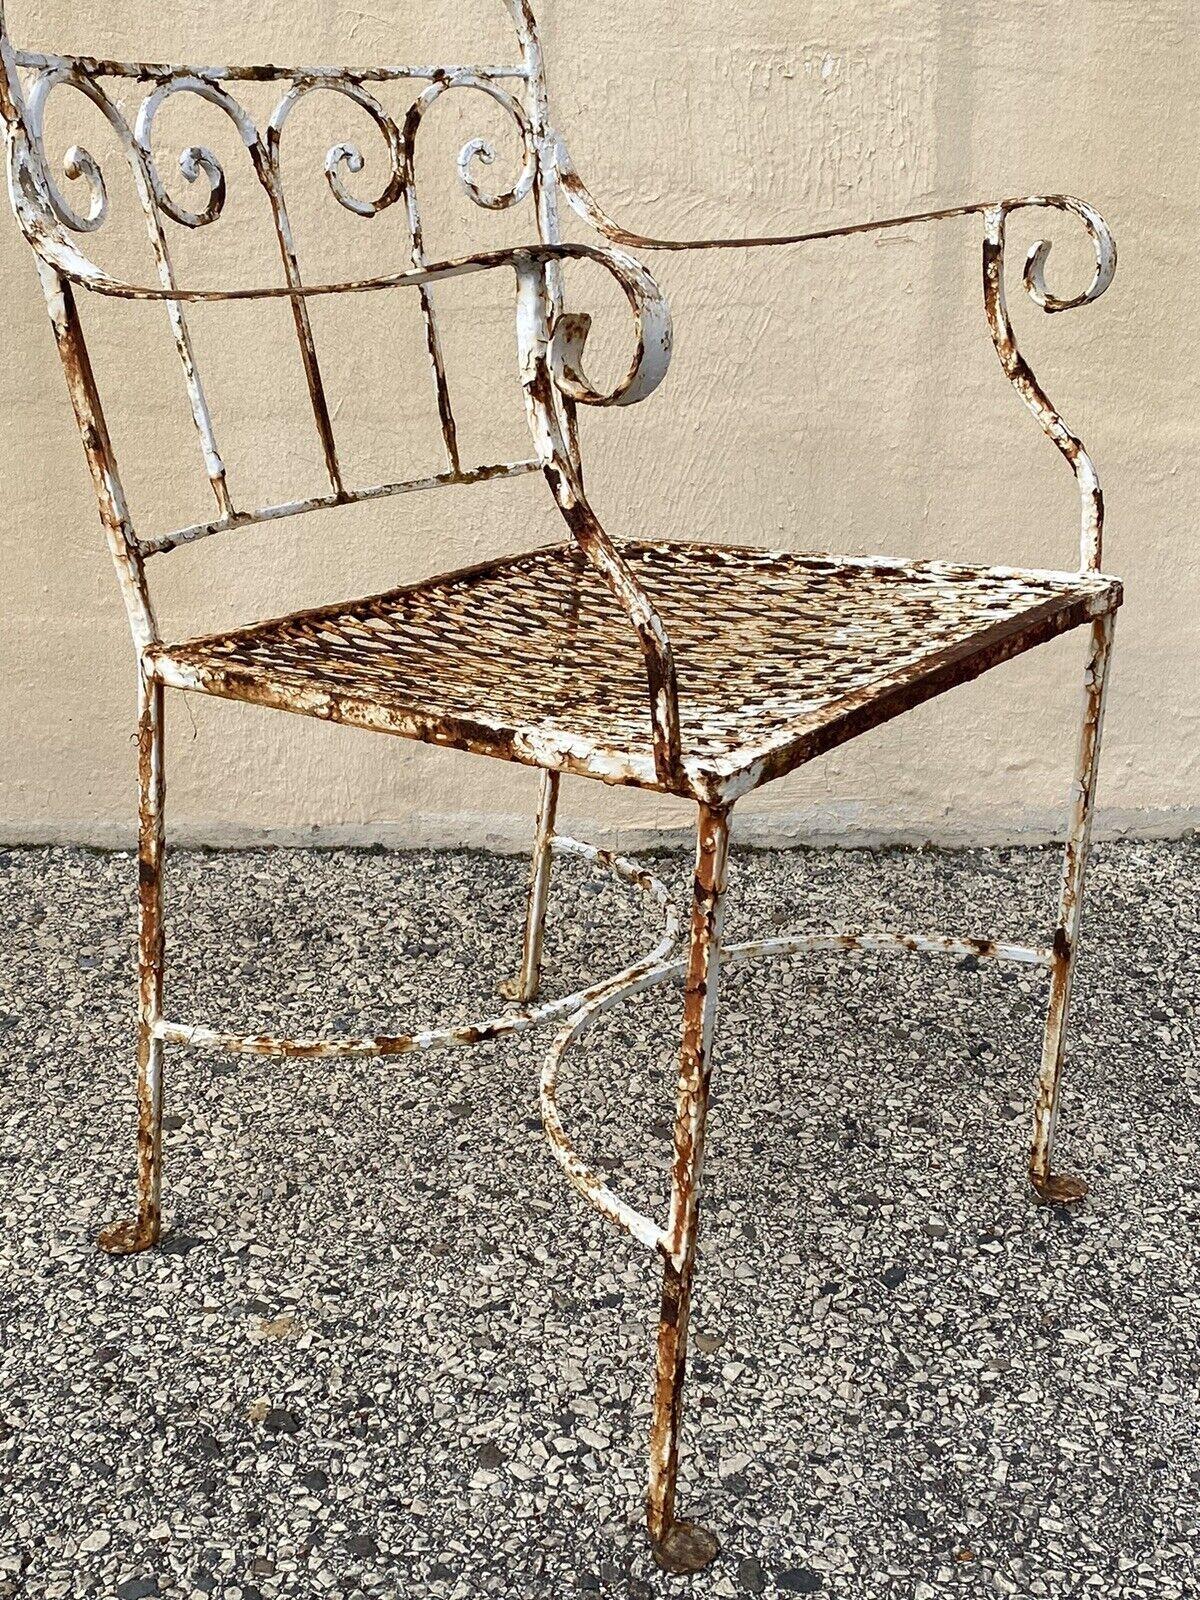 Antique Art Nouveau Scrolling Wrought Iron Garden Patio Dining Chairs - A Pair For Sale 7